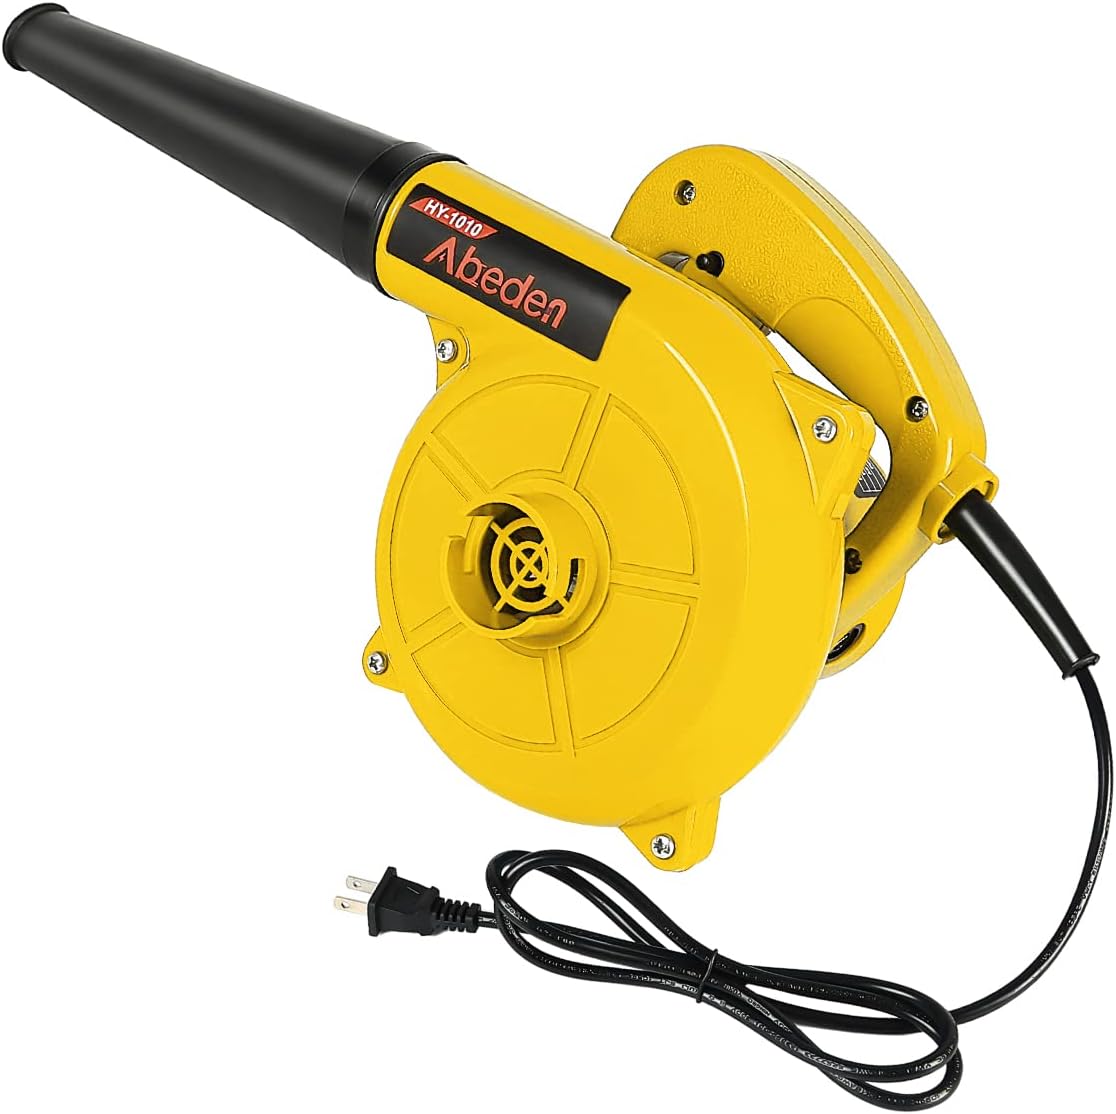 Corded Electric Leaf Blower,2 in 1 Small Handheld [...]